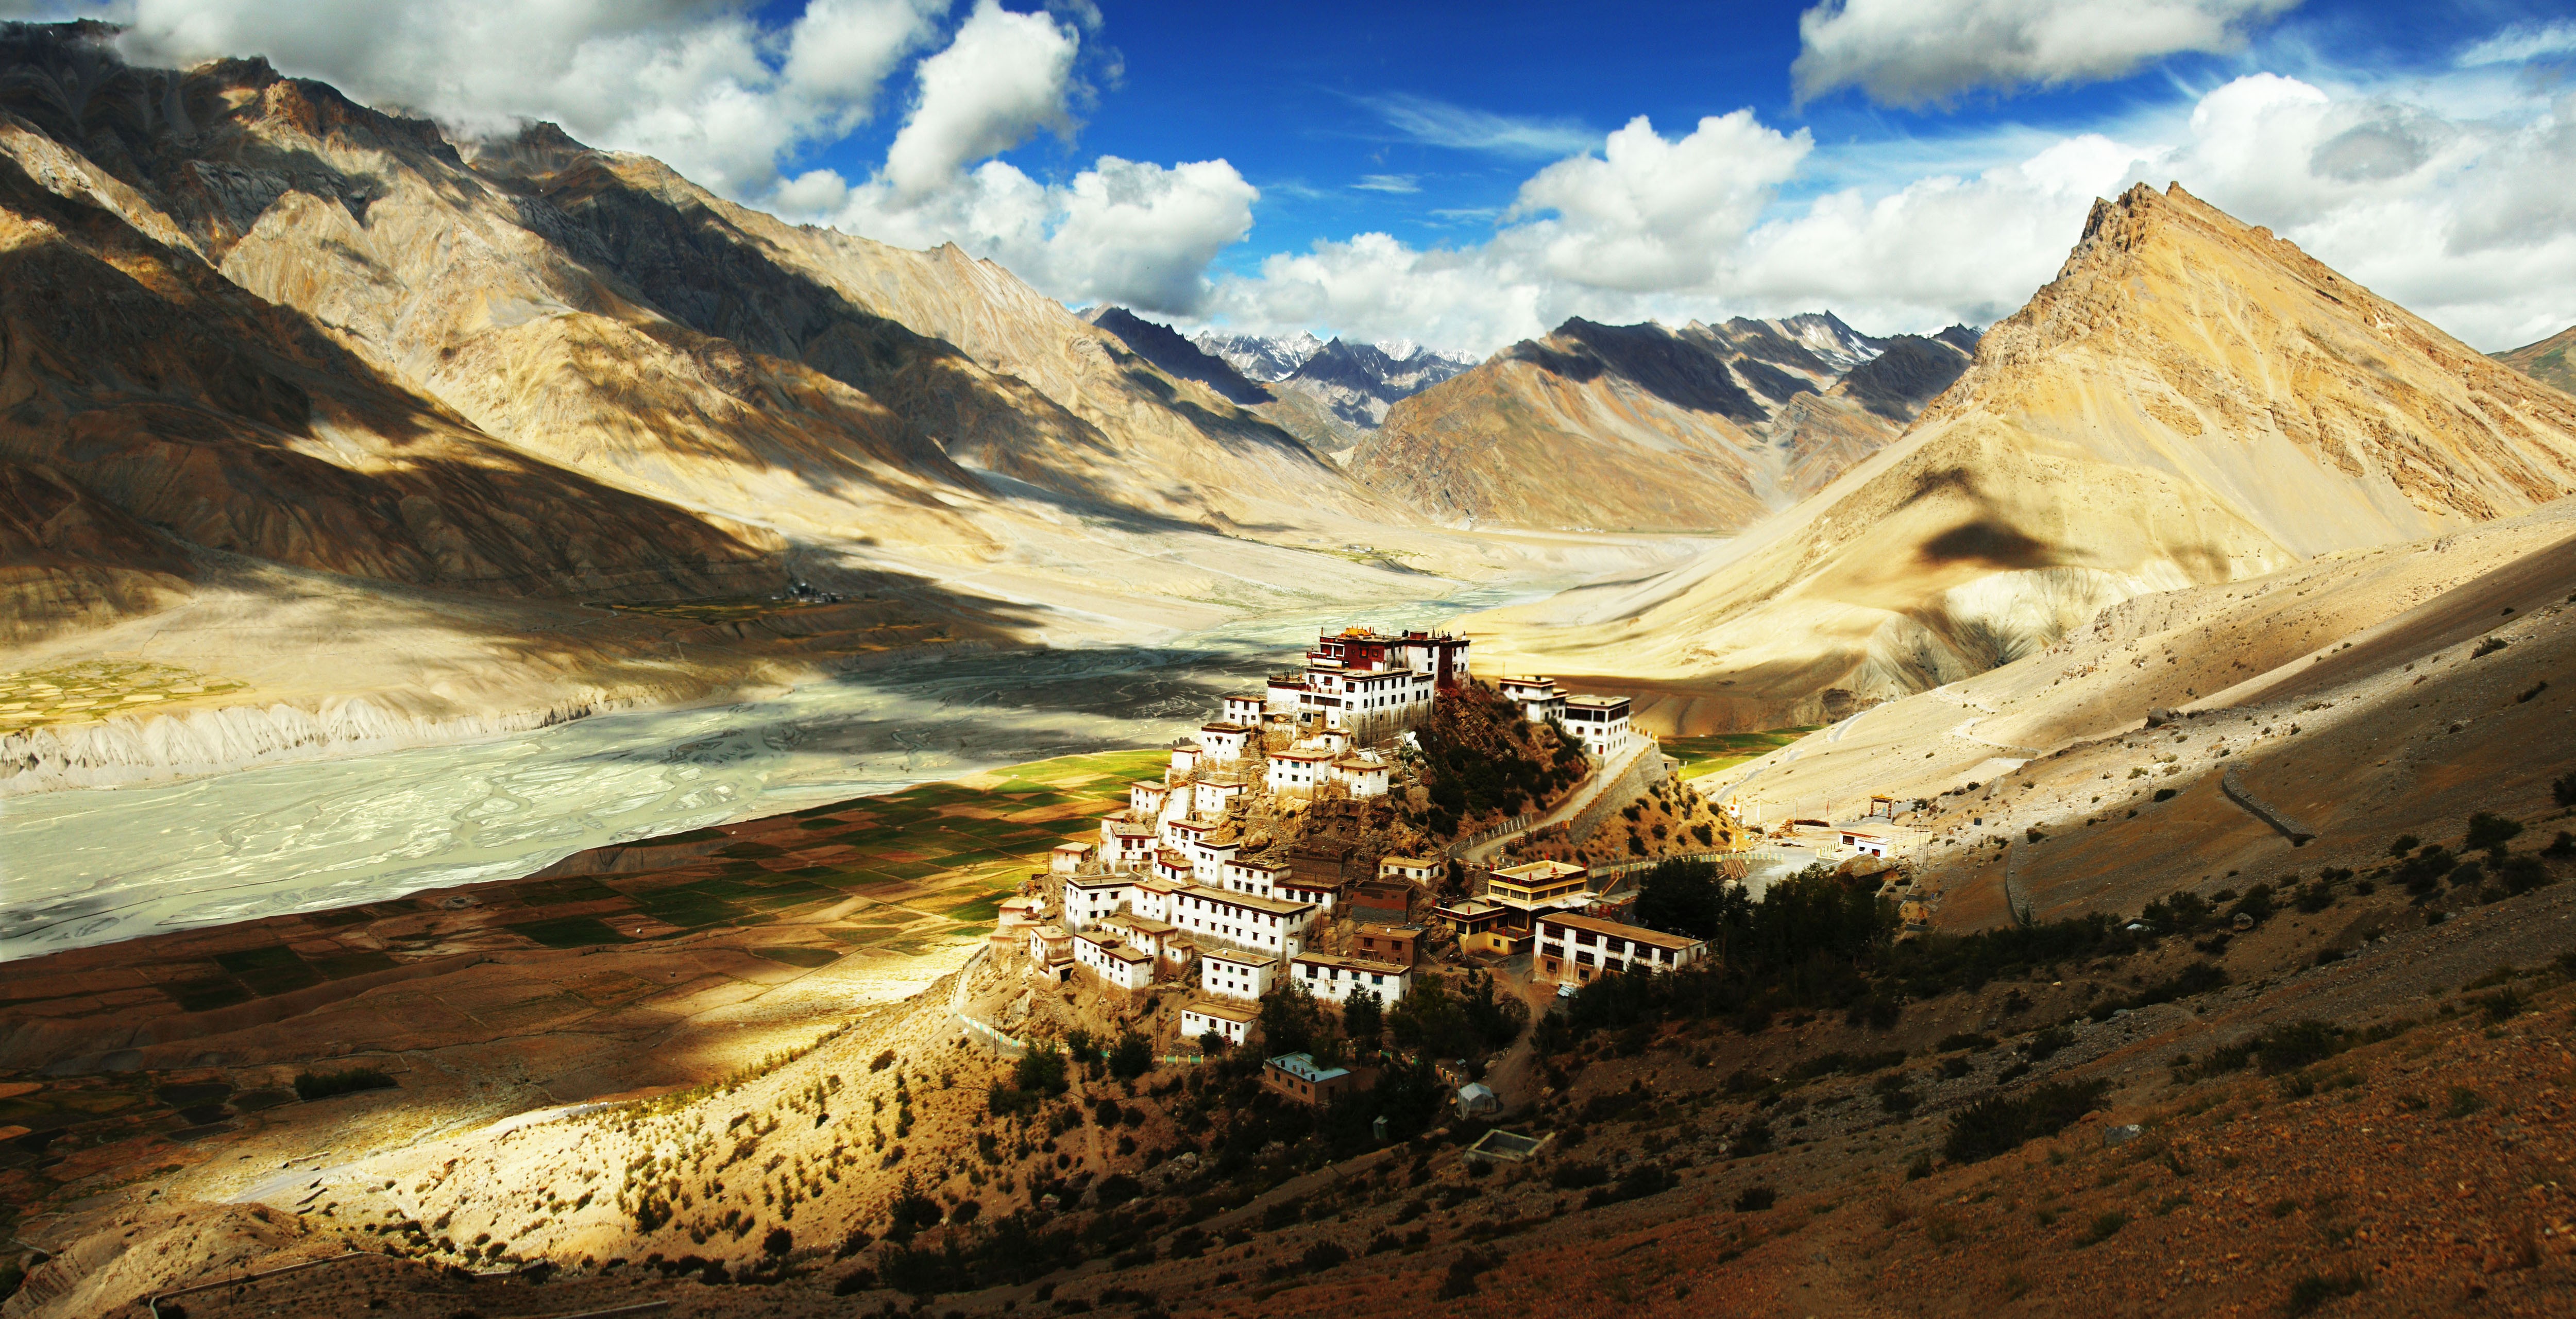 General 5000x2561 landscape Tibet mountains National Geographic monastery valley Asia nature